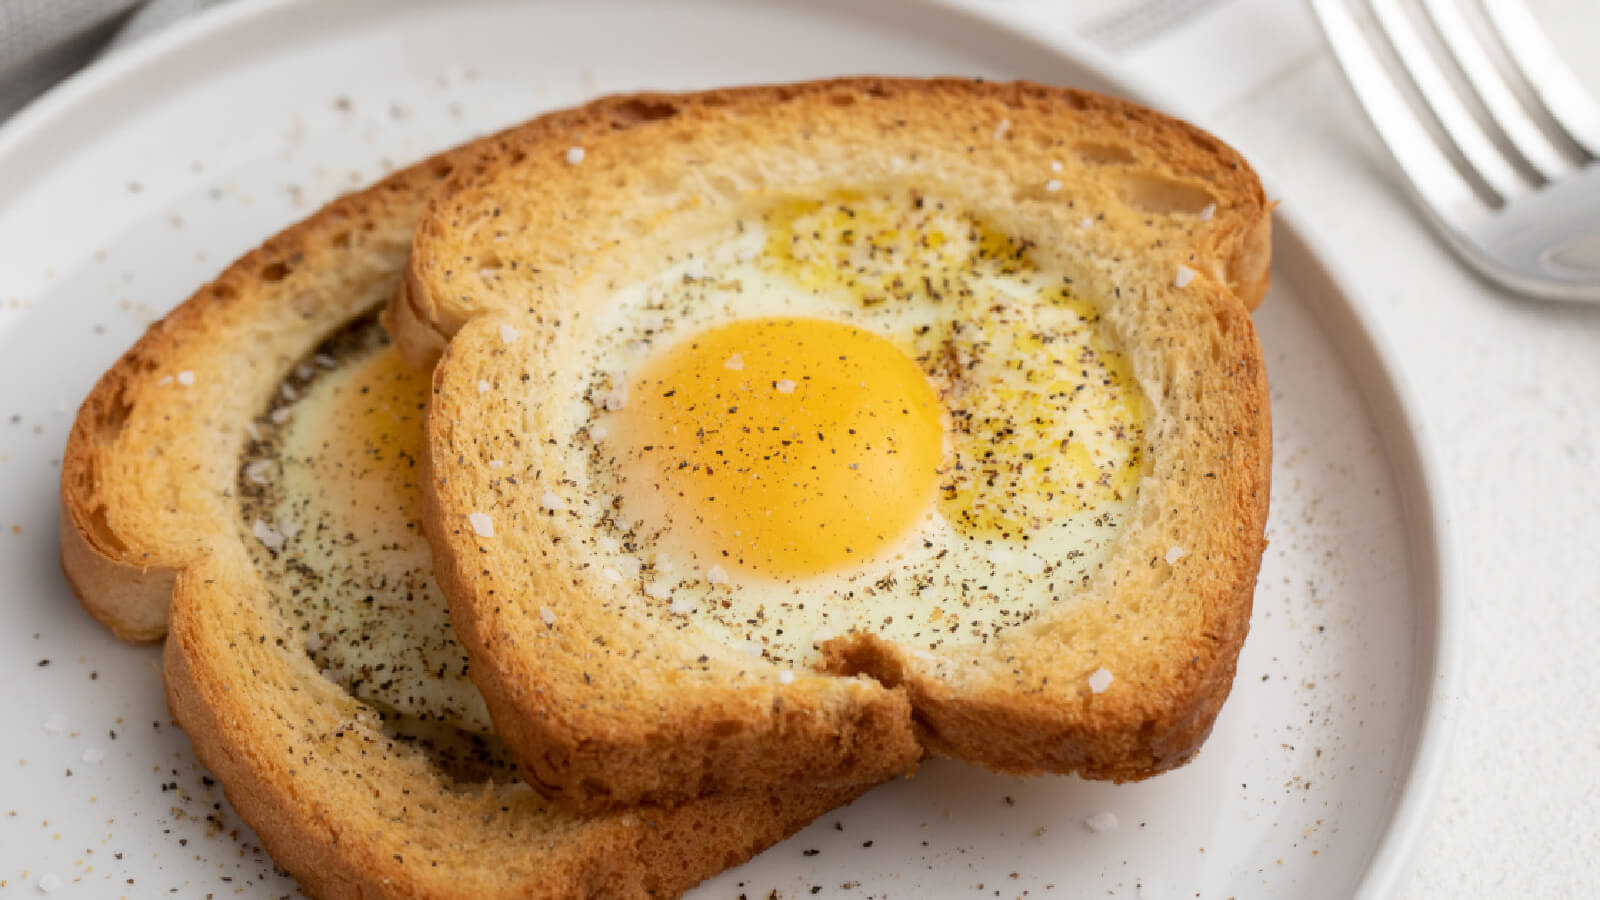 Egg in a basket made in the air fryer, garnish with salt and pepper and served on a white plate.